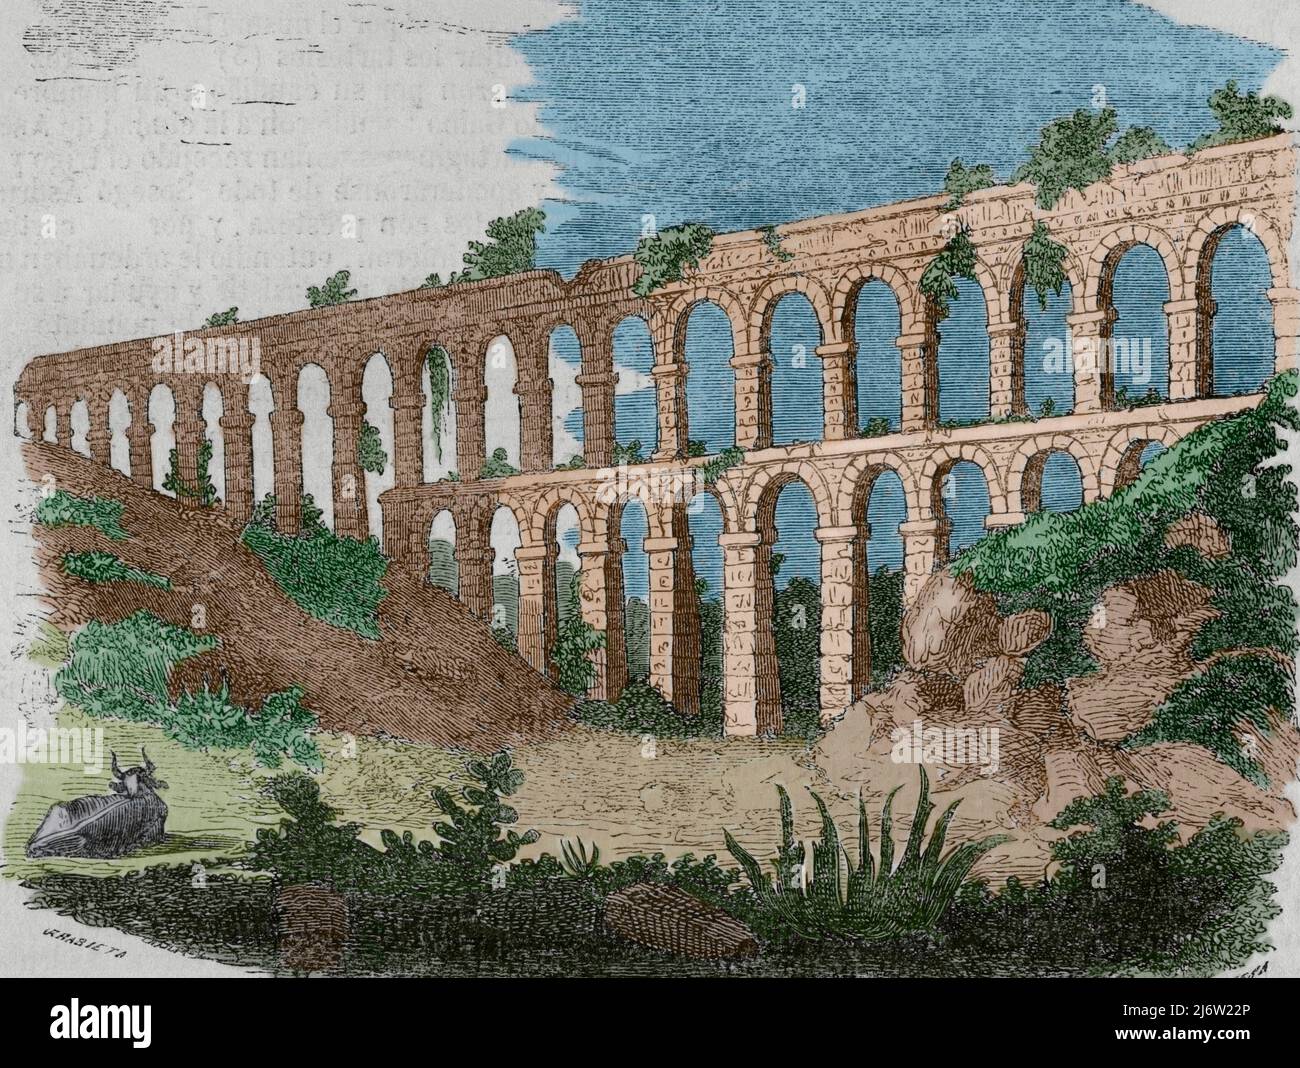 Spain, Catalonia. Aqueduct of Tarragona, also known as the Bridge of Ferreres or Pont del Diable. It was built during the time of Emperor Augustus (63 BC-14 AC) to supply water to the city of Tarragona, from the nearby river Francolí. Illustration by Urrabieta. Engraving by Cibera. Later colouration. Historia General de España Father Mariana. Madrid, 1852. Author: Urrabieta. 19th century Spanish artist. Ildefonso Cibera. 19th century Spanish engraver. Stock Photo